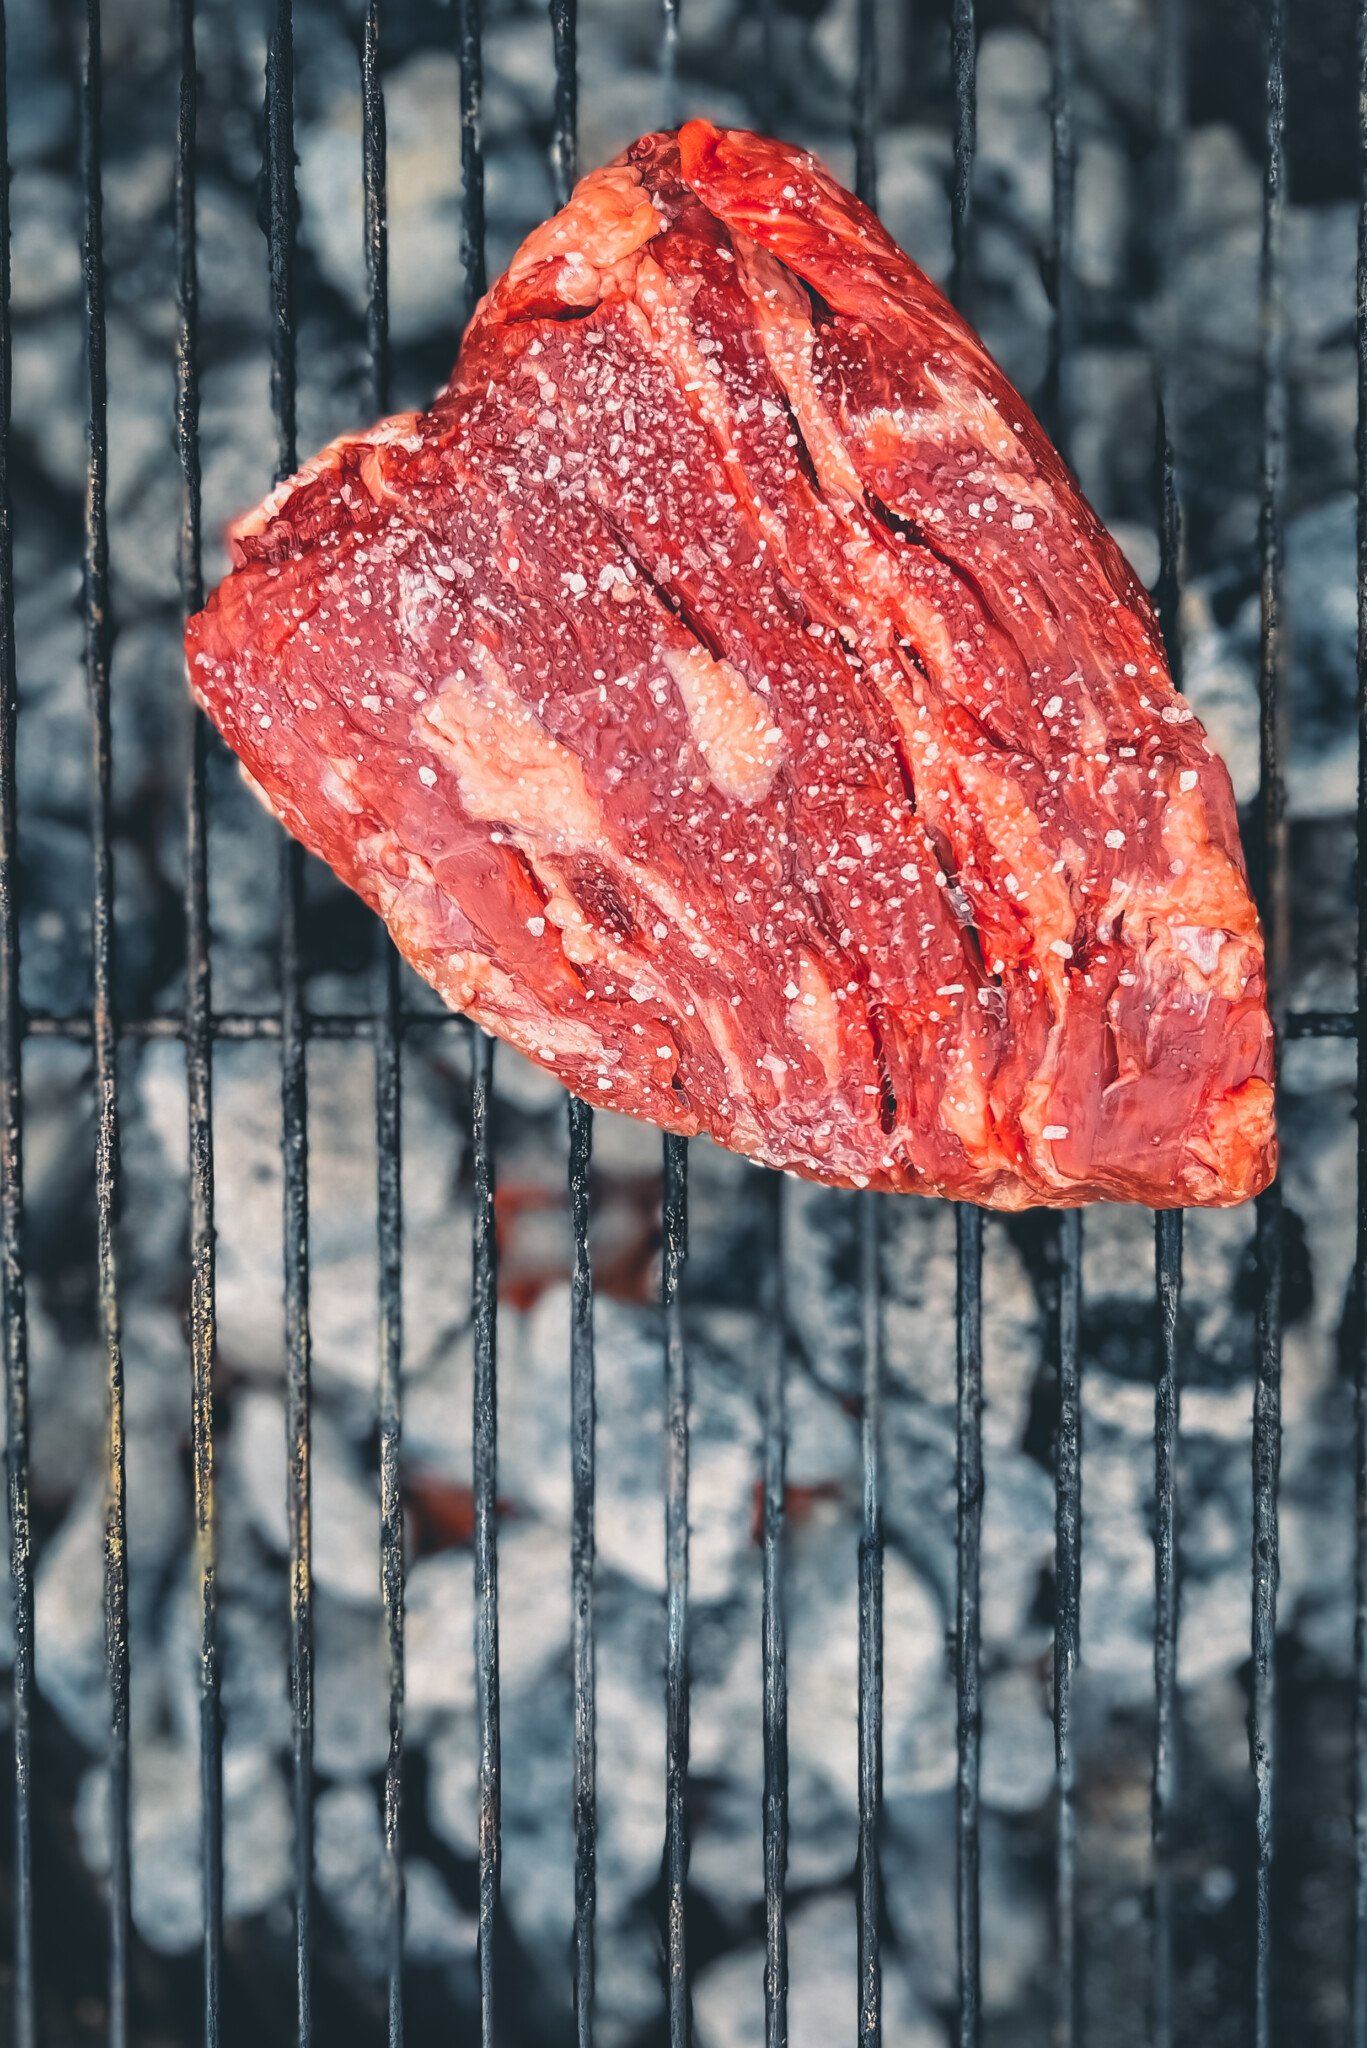 Bavette steak hitting the grill; Seasoned with salt and over the goals. 